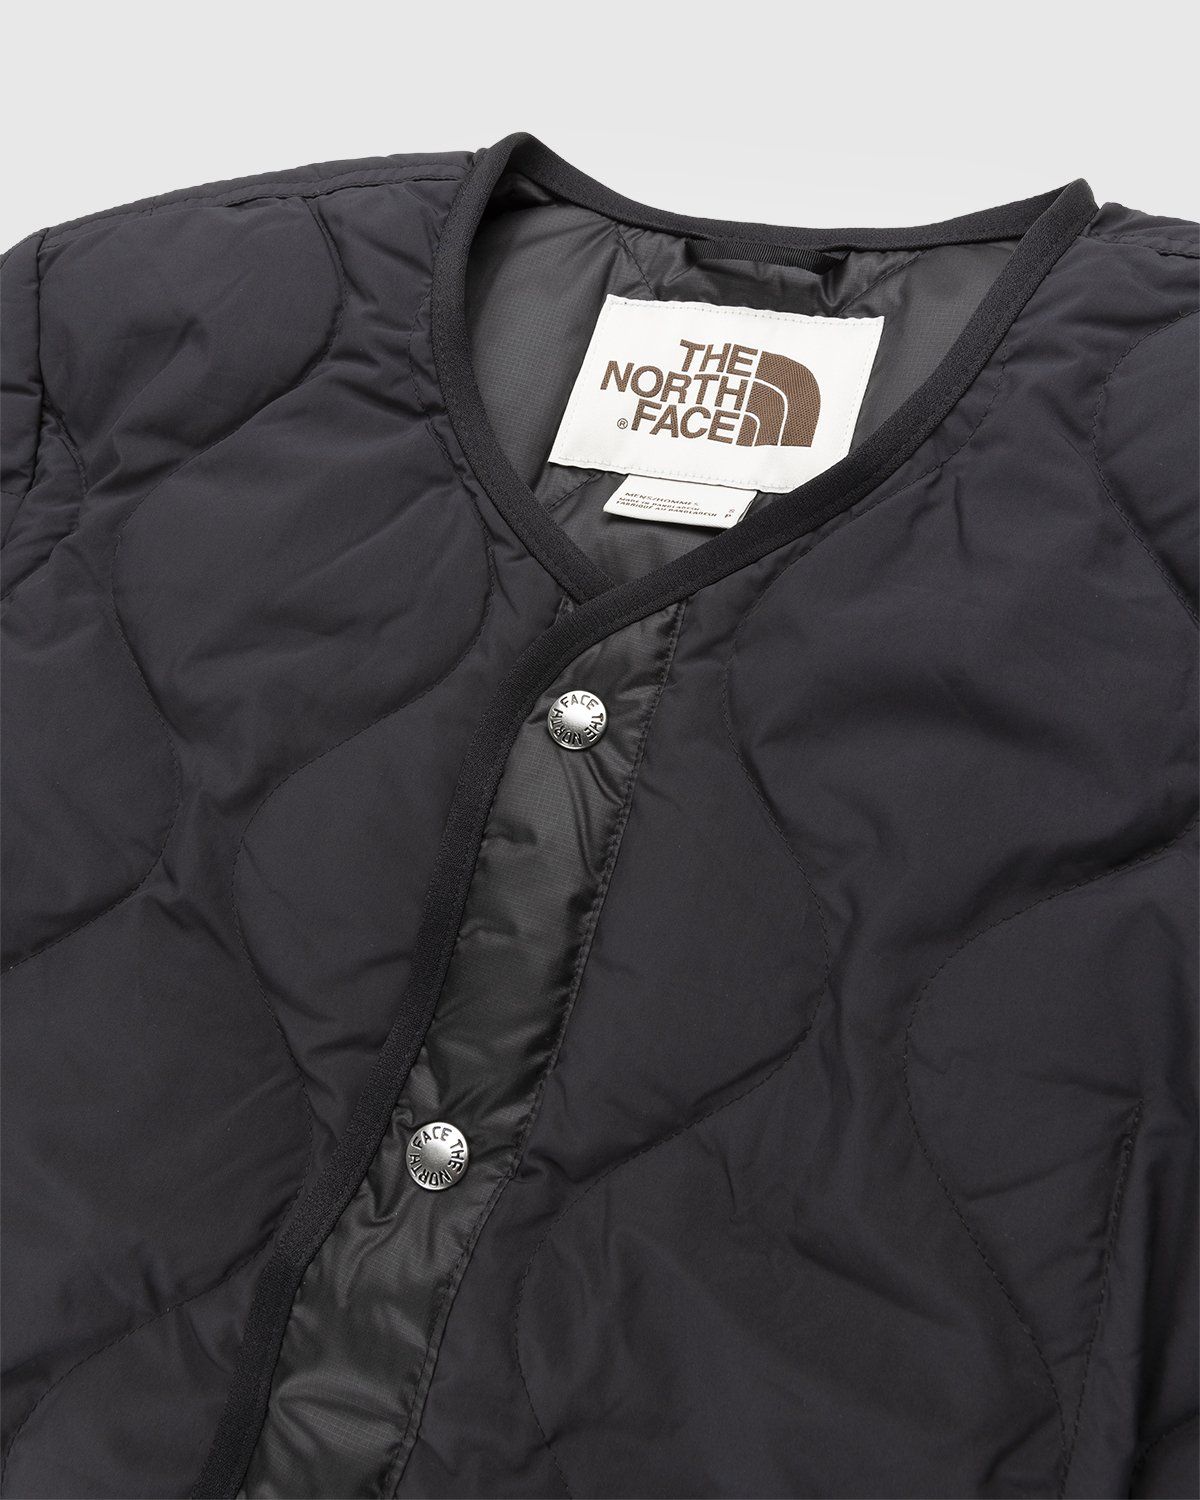 The North Face – M66 Down Jacket Black - Down Jackets - Black - Image 3